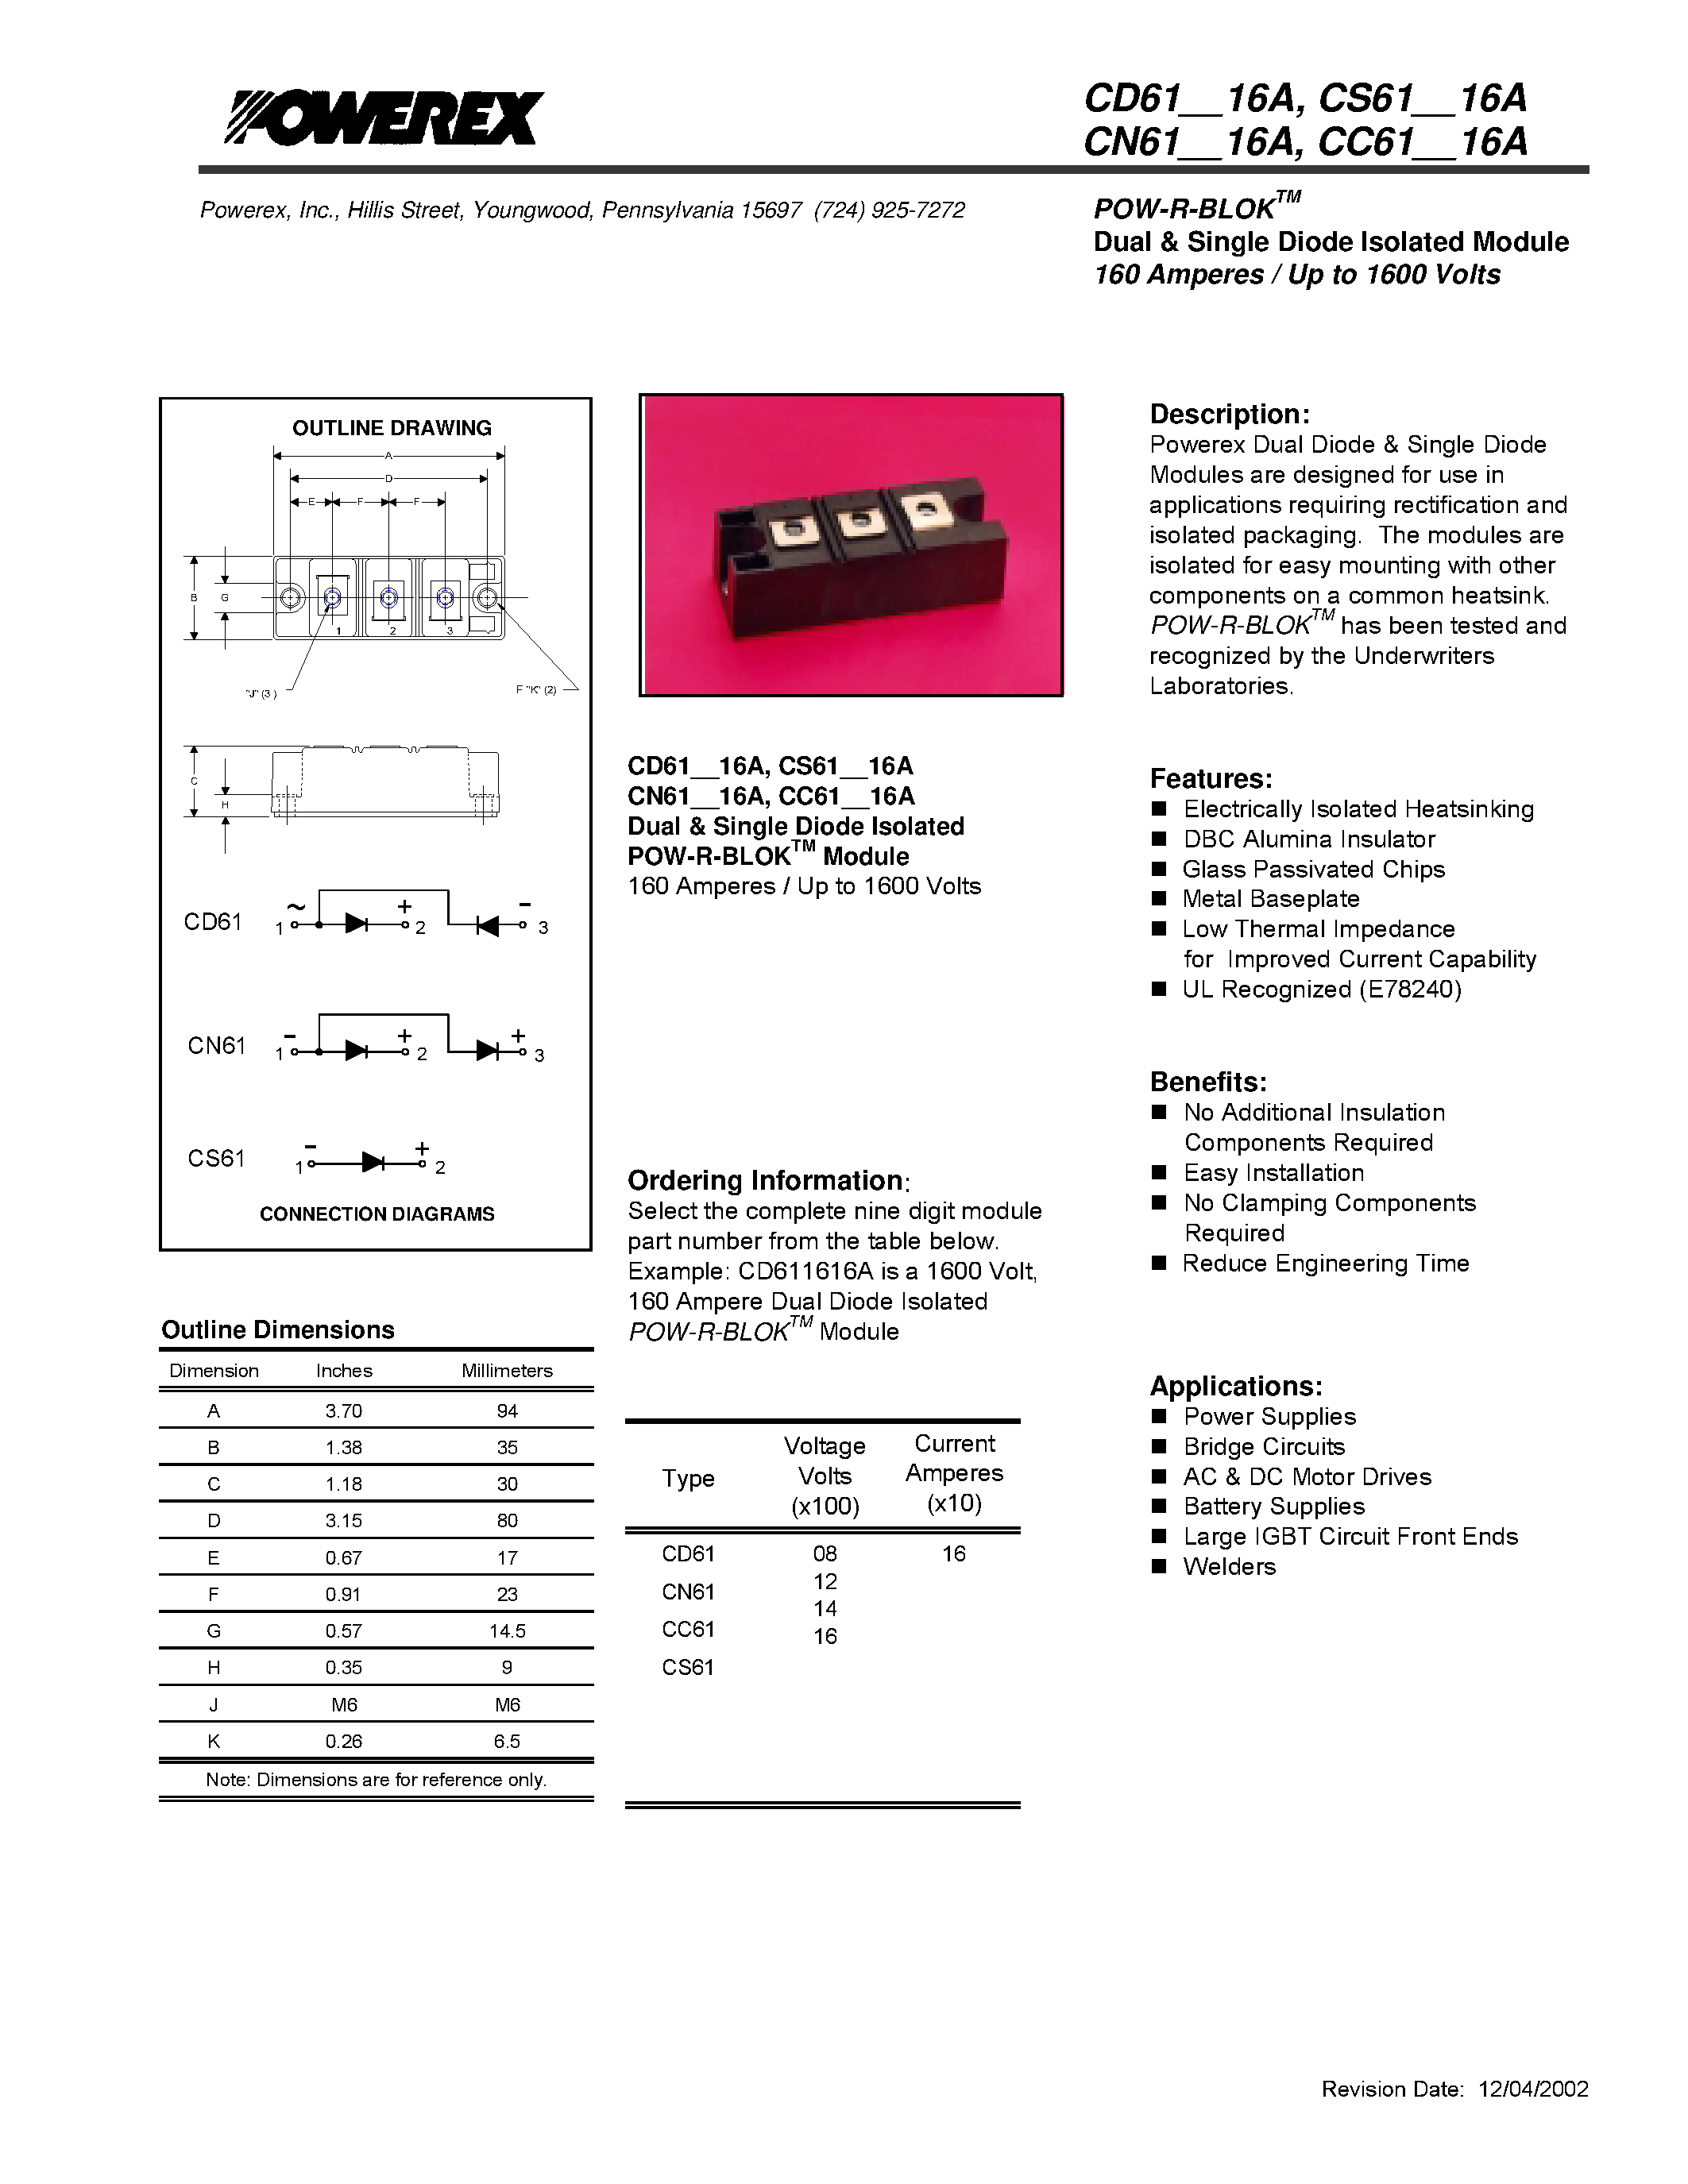 Datasheet CD611216A - POW-R-BLOK Dual & Single Diode Isolated Module 160 Amperes / Up to 1600 Volts page 1